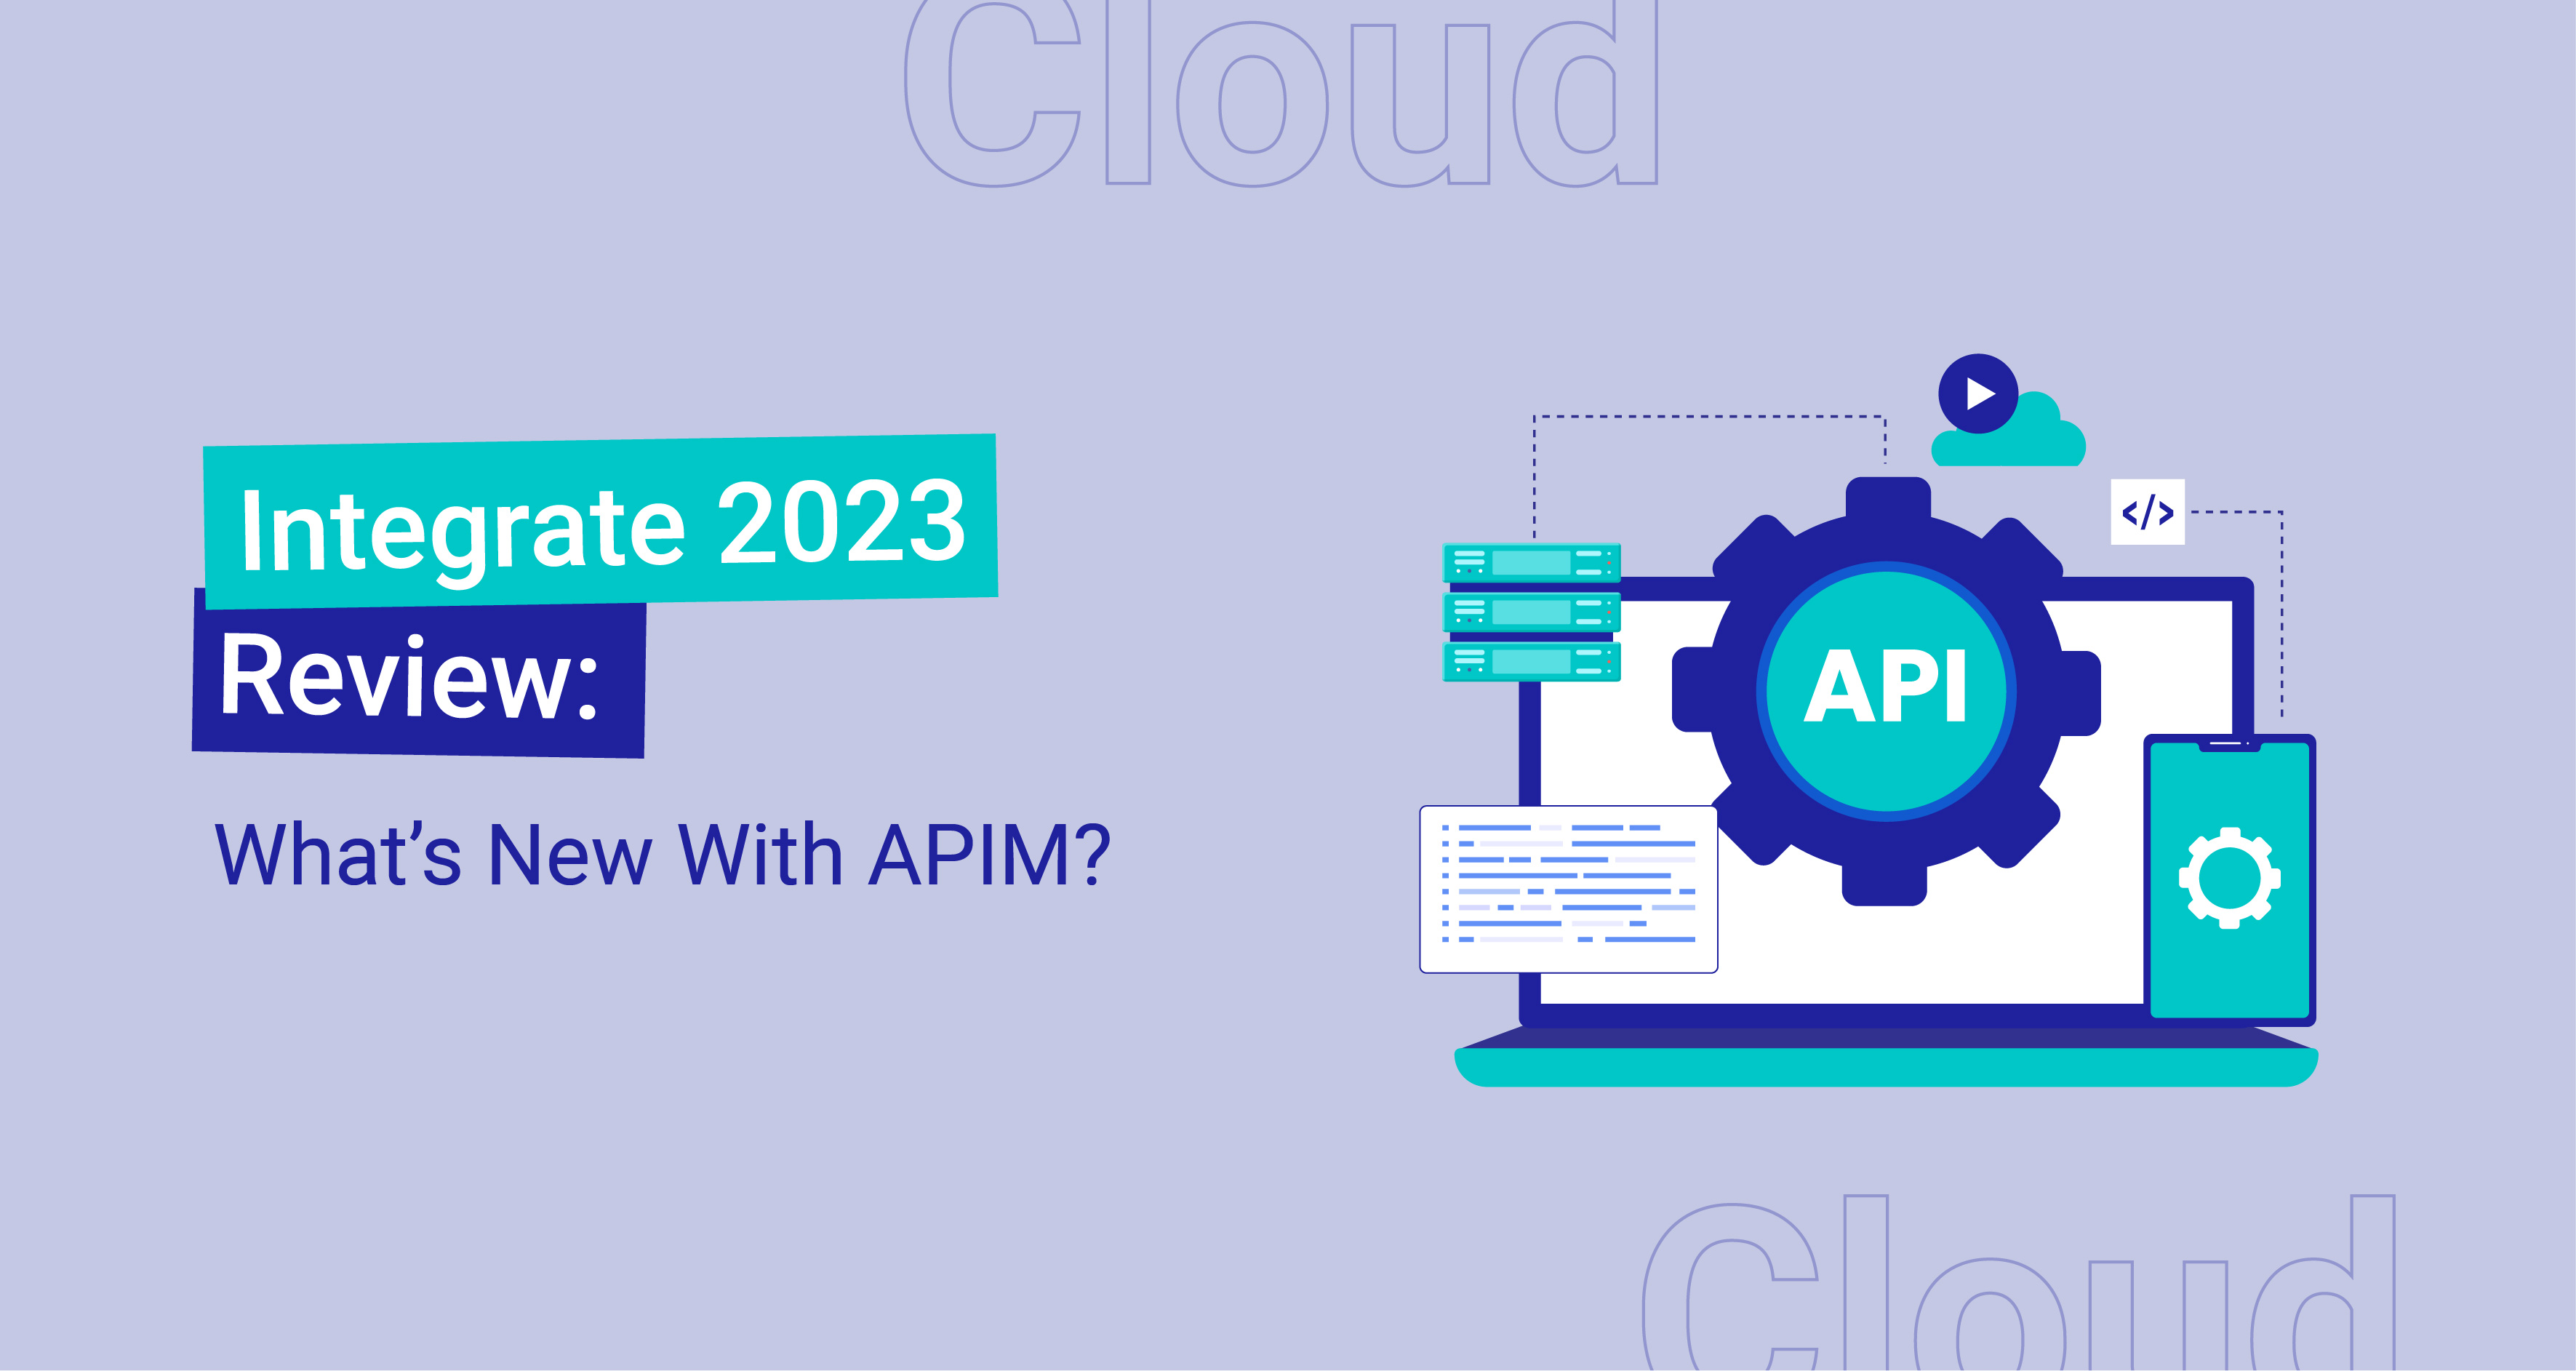 Integrate 2023 Review: What’s New With APIM?